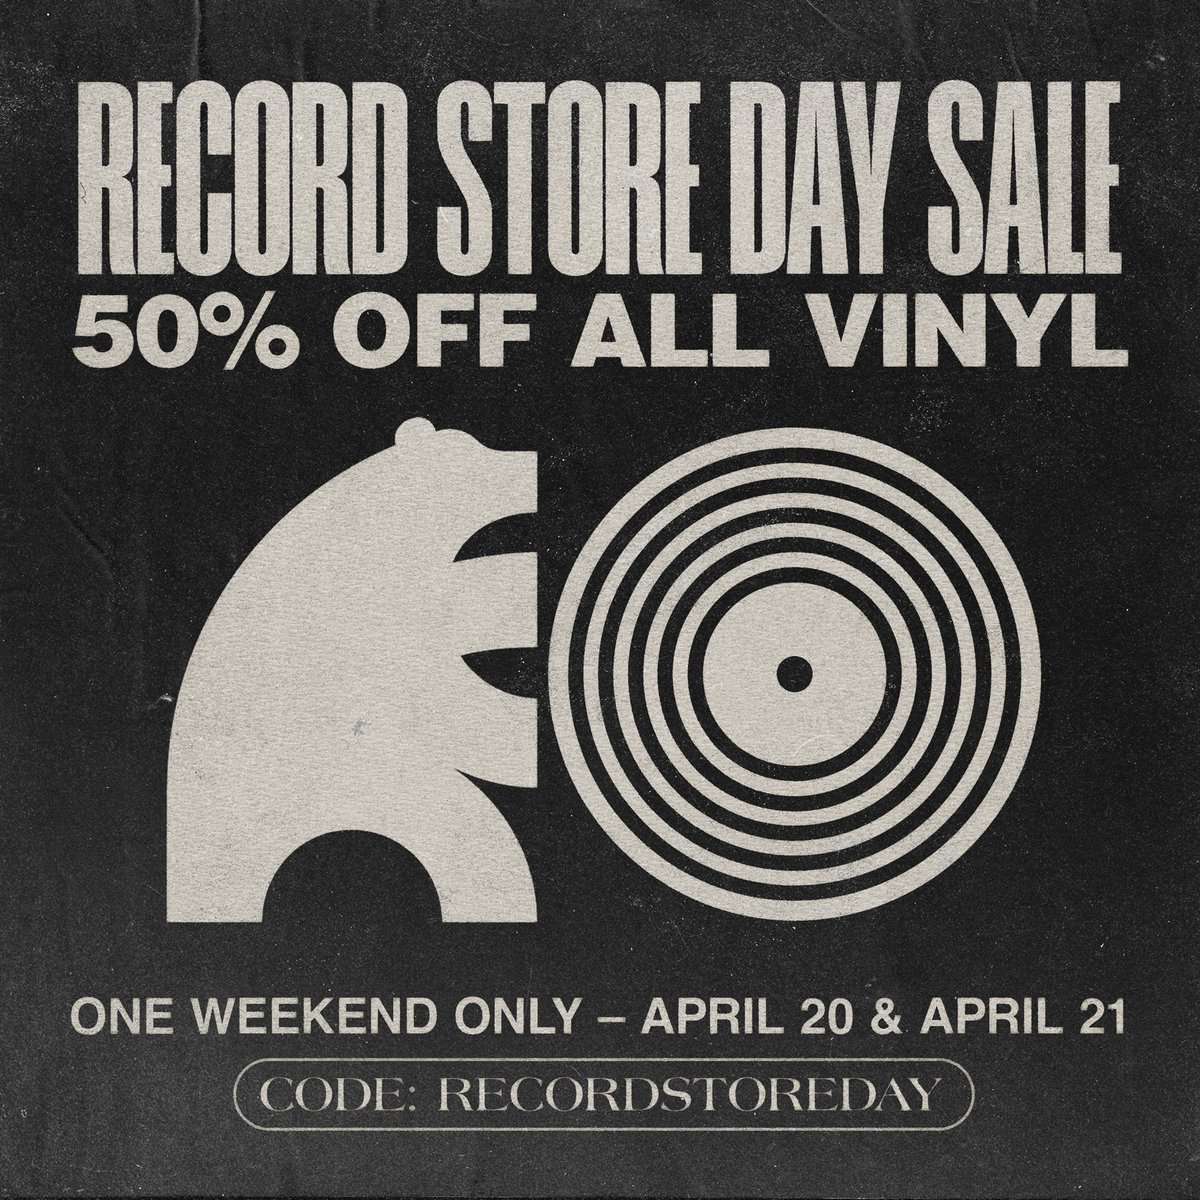 This weekend for @recordstoreday - we're doing a special one weekend only sale of all vinyl records on sale now. 50% OFF. ft record by: @hereisalden @iamgodford @JACK1EHAYES + more. Code: Recordstoreday ONLY: April 20-21 (Save the date) Store: store.pack.am/collections/vi…